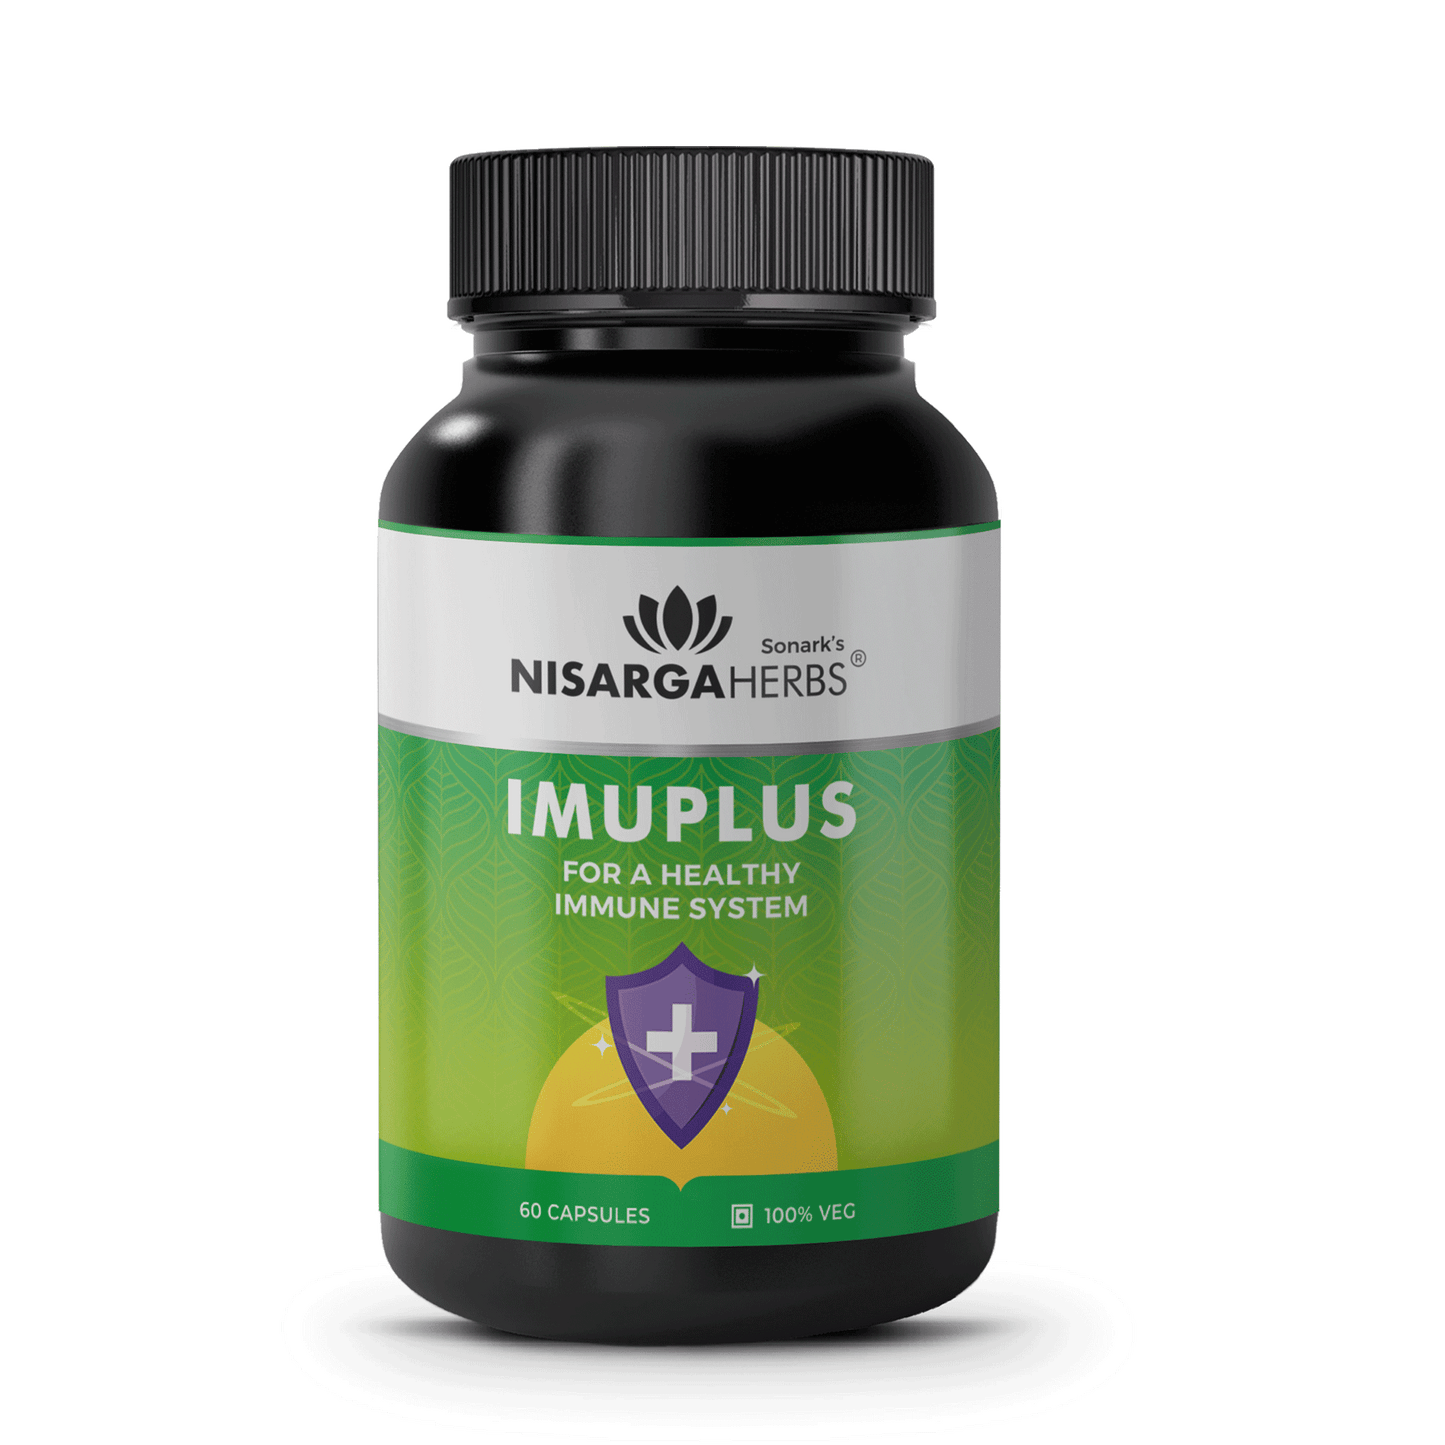 Imuplus - Improves immunity naturally and promotes healing after surgeries